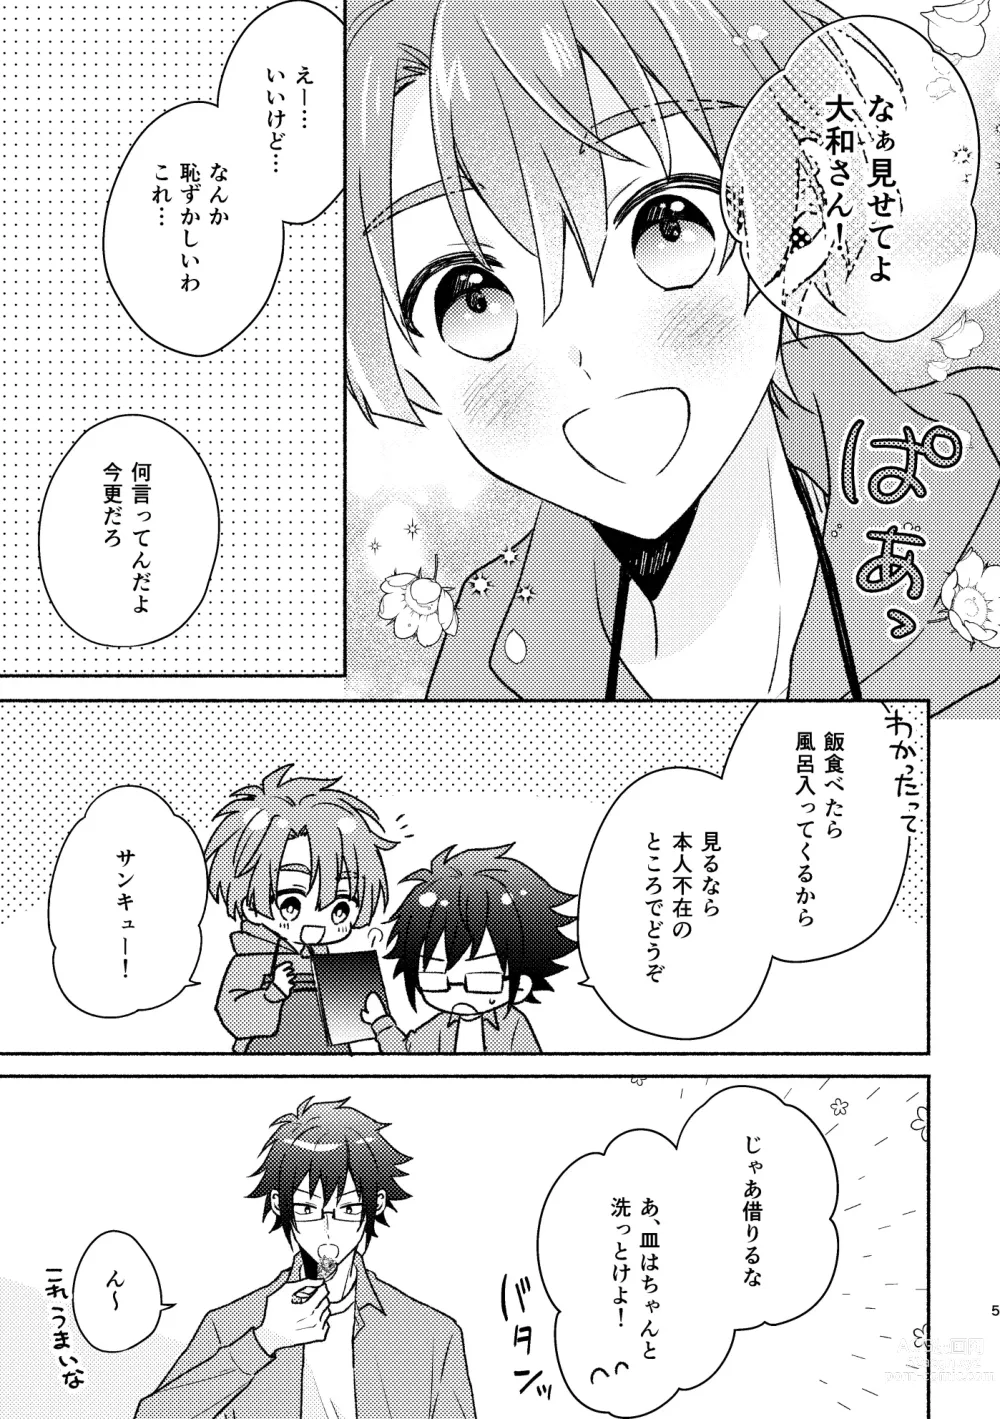 Page 4 of doujinshi Secret Expectations